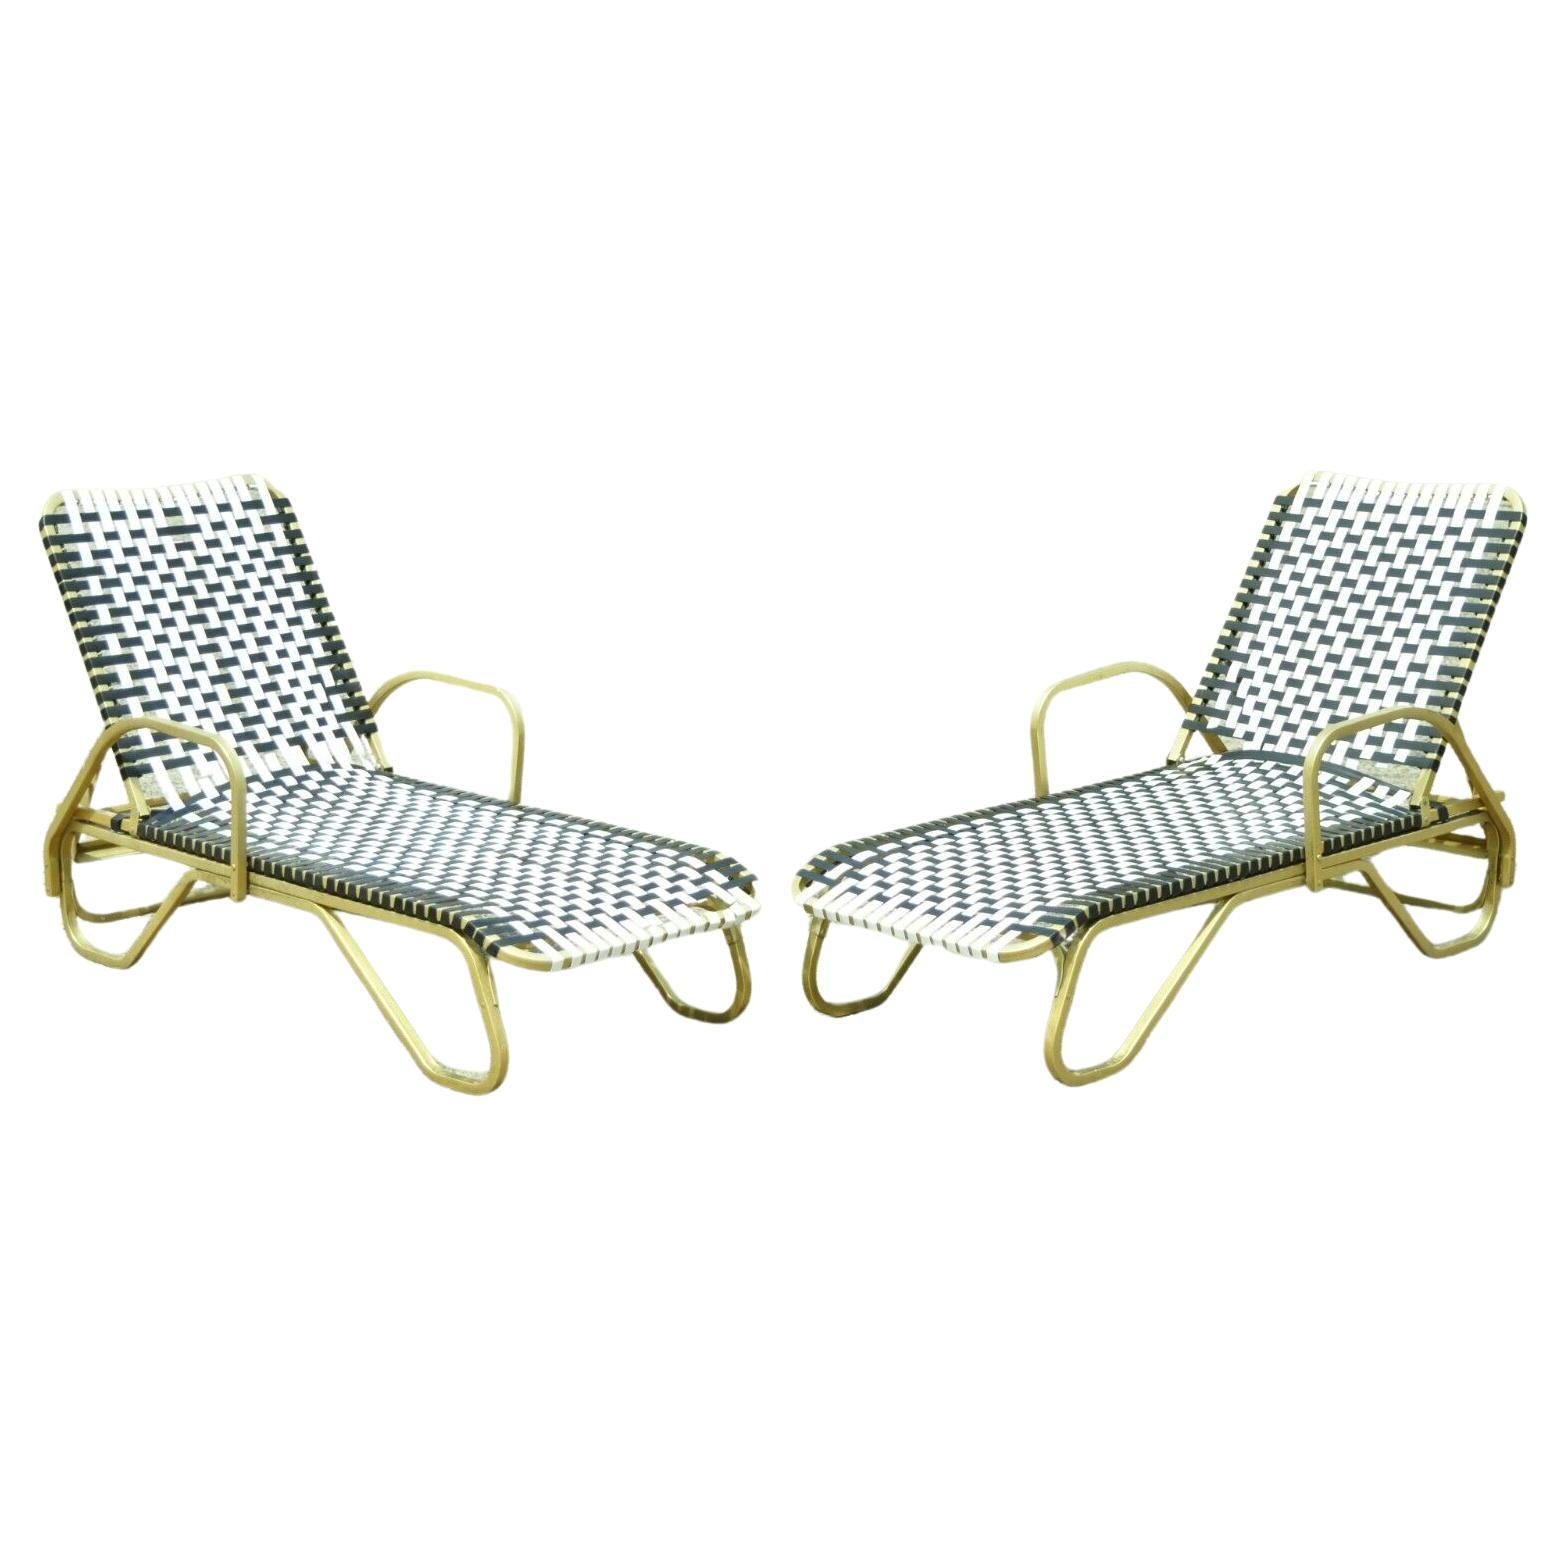 Hollywood Regency Vinyl Strap Aluminum Pool Patio Chaise Lounge Chairs, a Pair